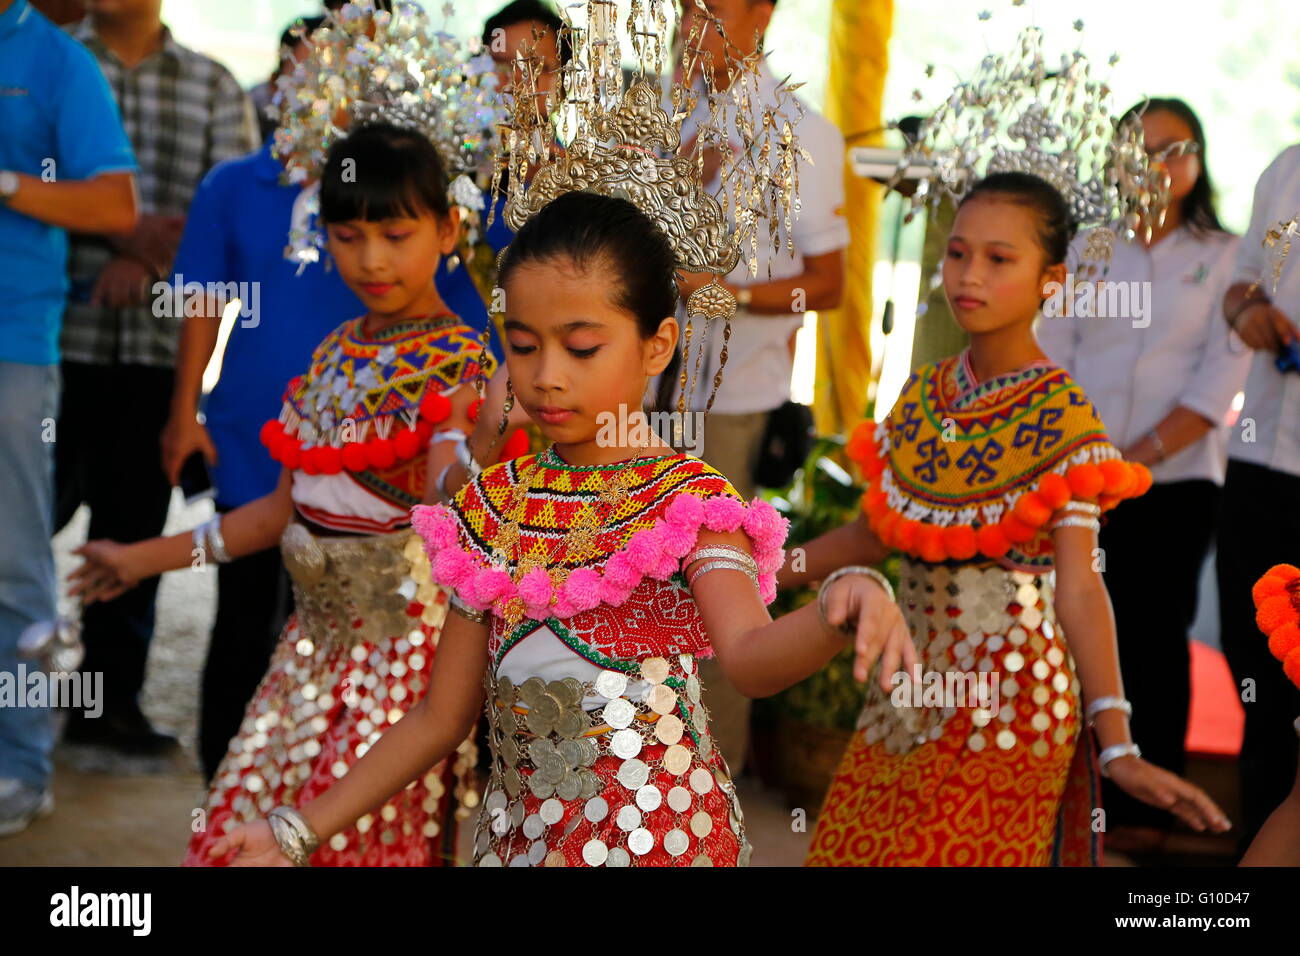 Sarawak native, Iban teenager girls in traditional costume traditional dance performance. The Ibans are a branch of the Dayak pe Stock Photo